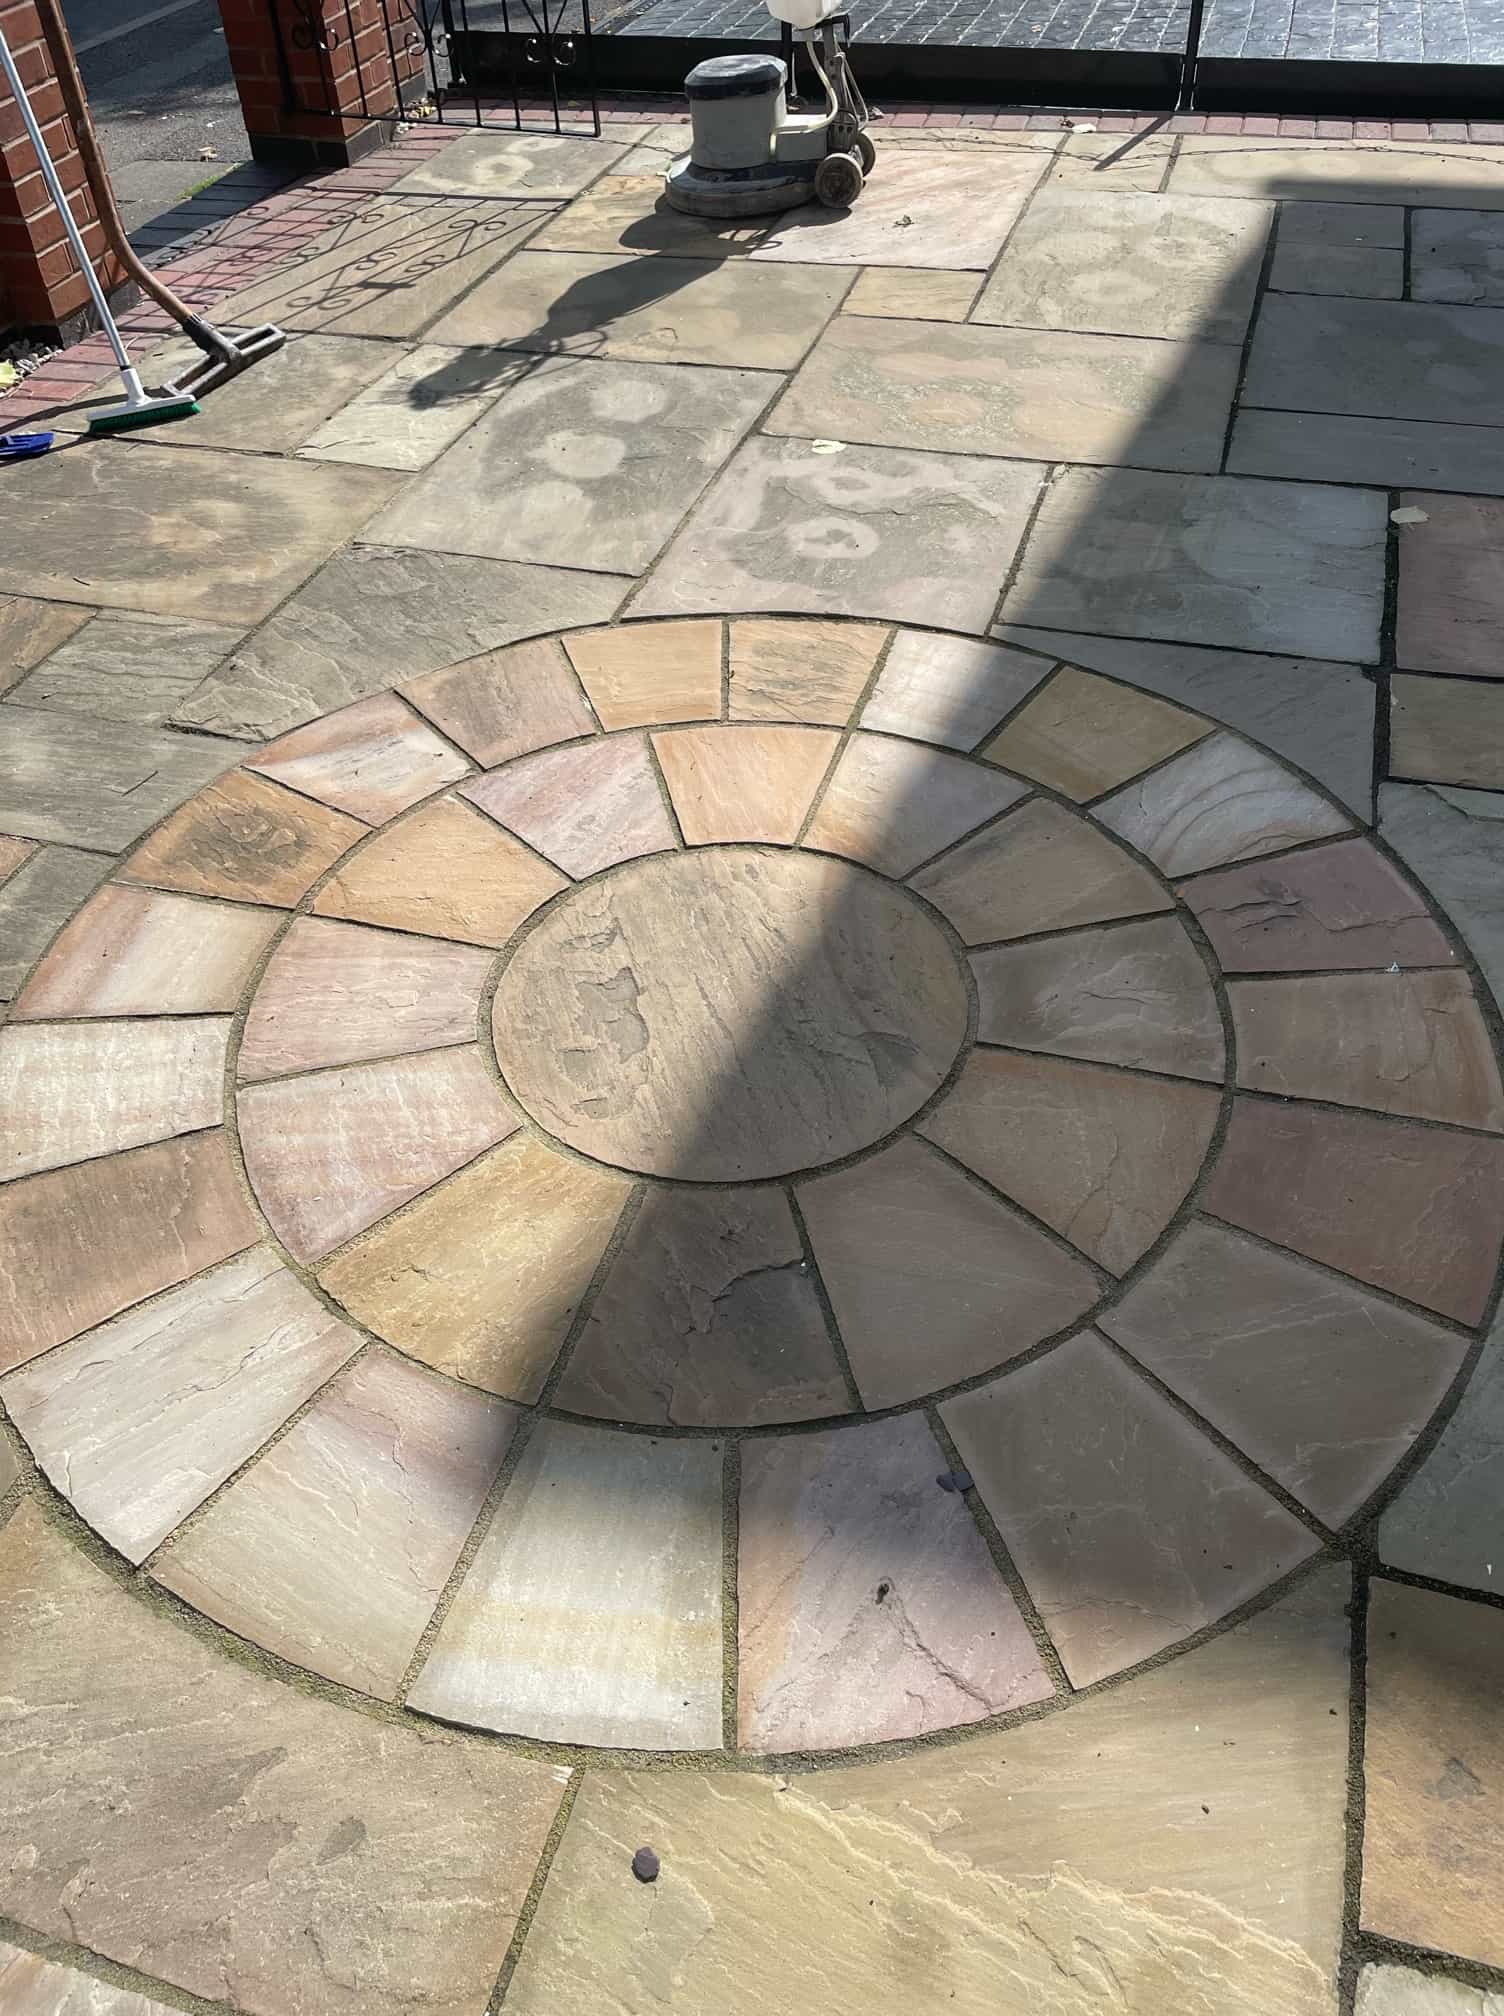 Sandstone Patio Before Cleaning Poets Corner Coventry